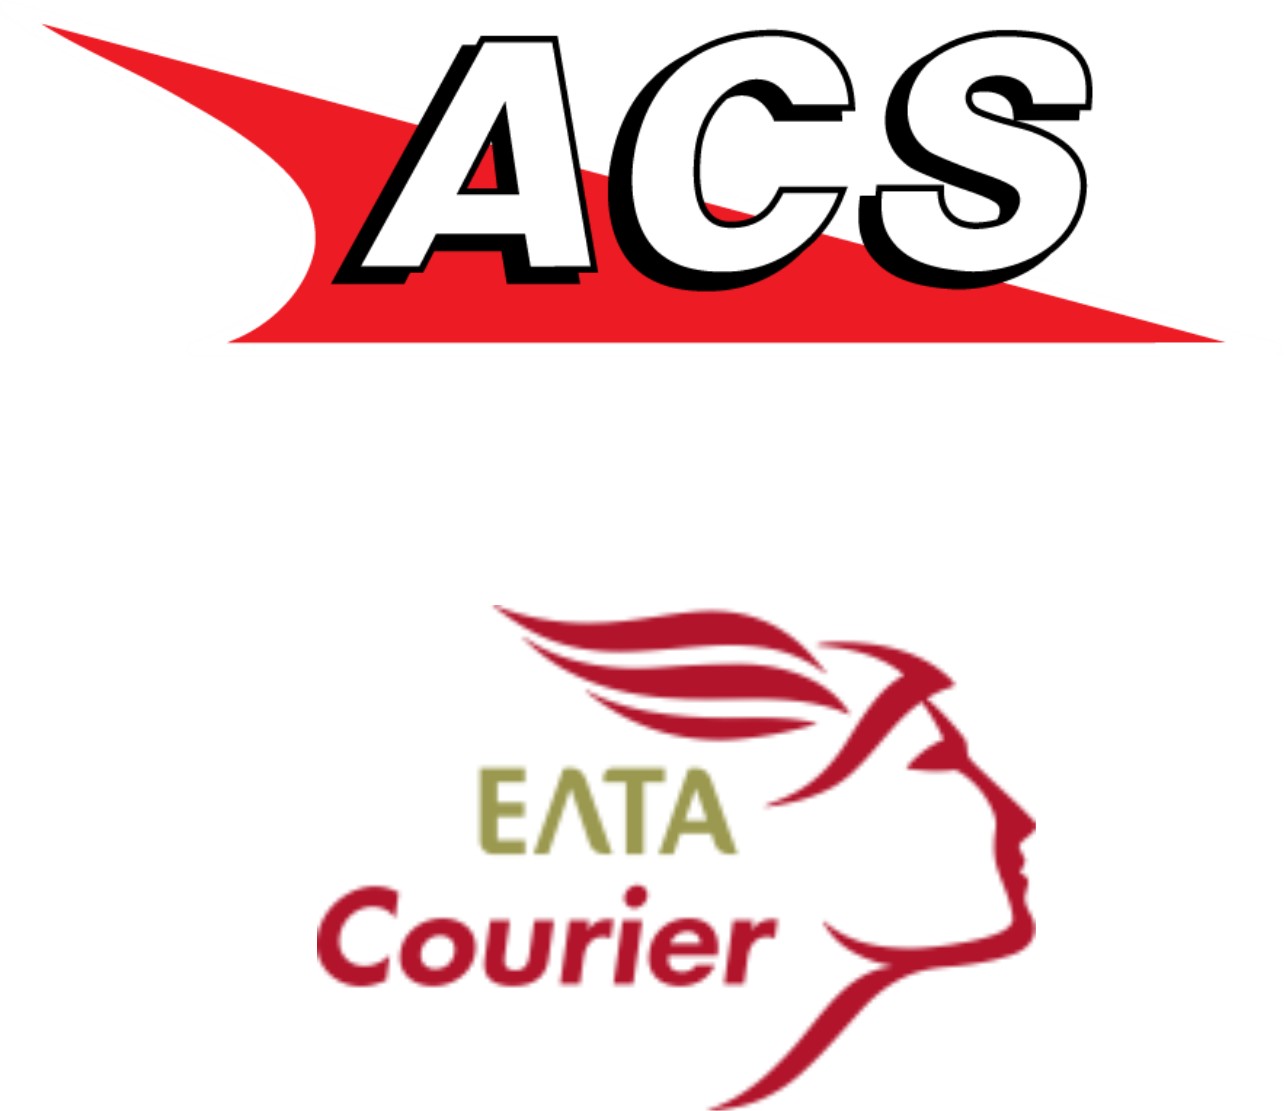 ACS η ΕΛΤΑ Courier